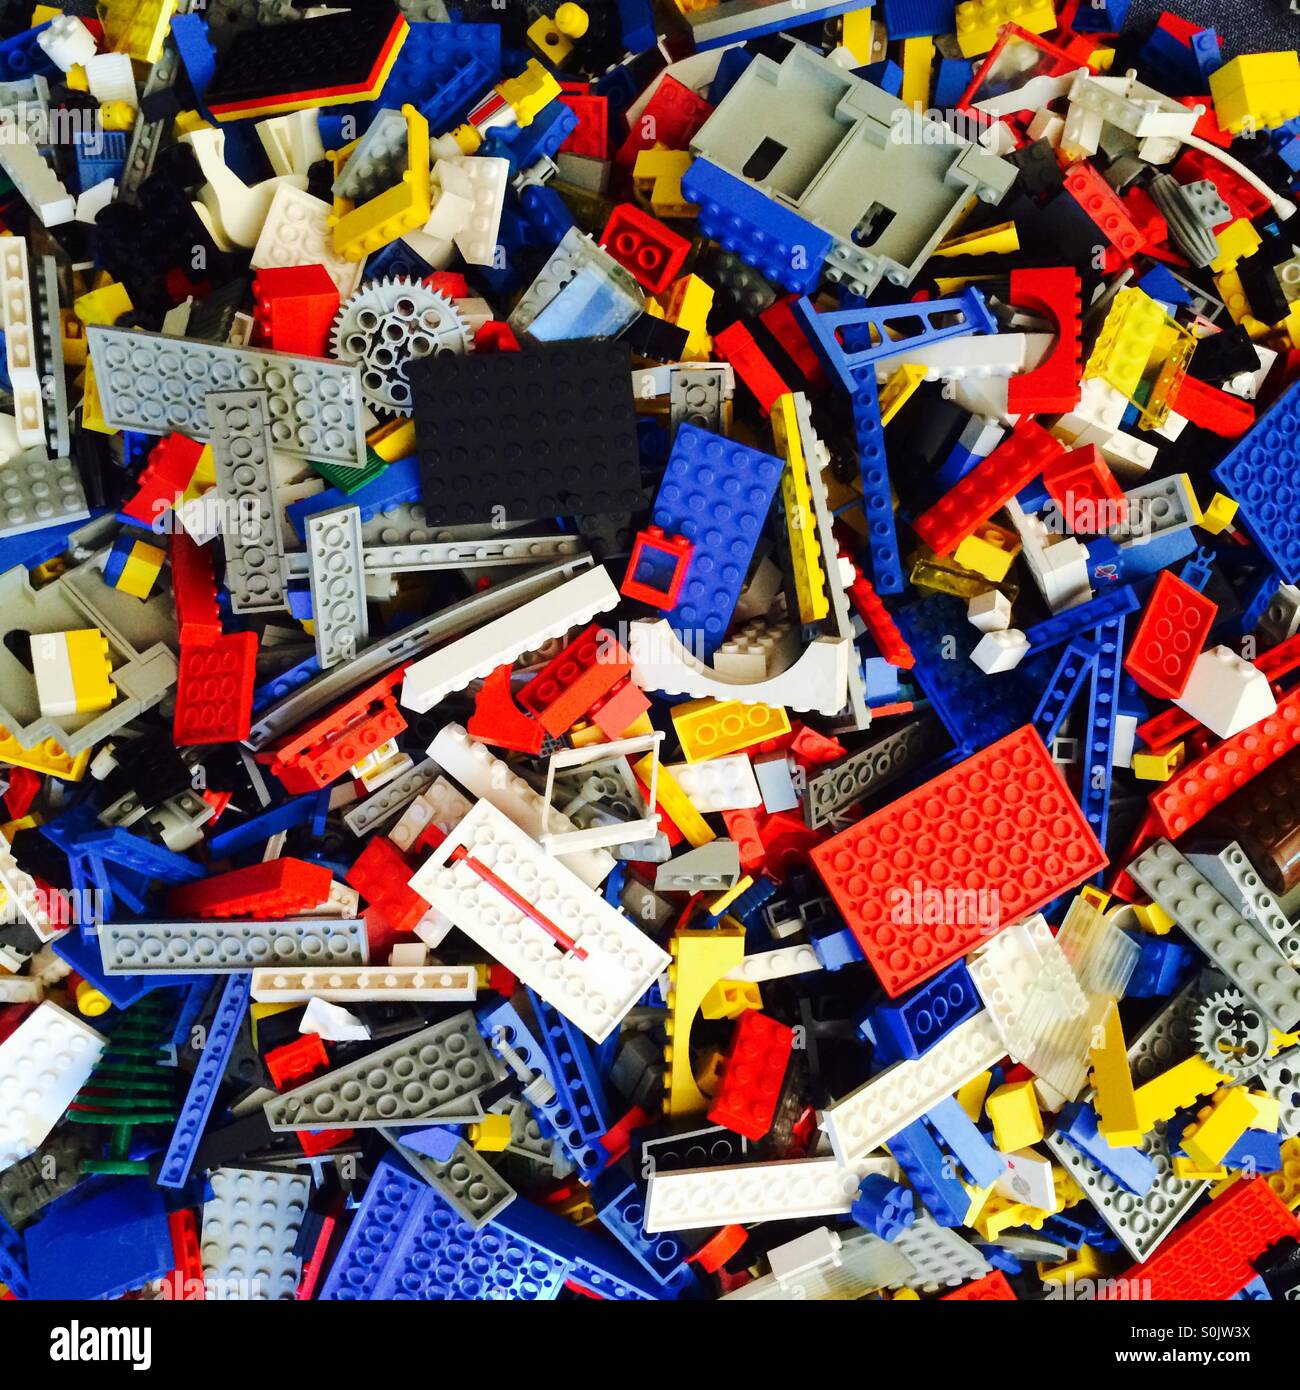 A pile of assorted Lego bricks and pieces. Stock Photo